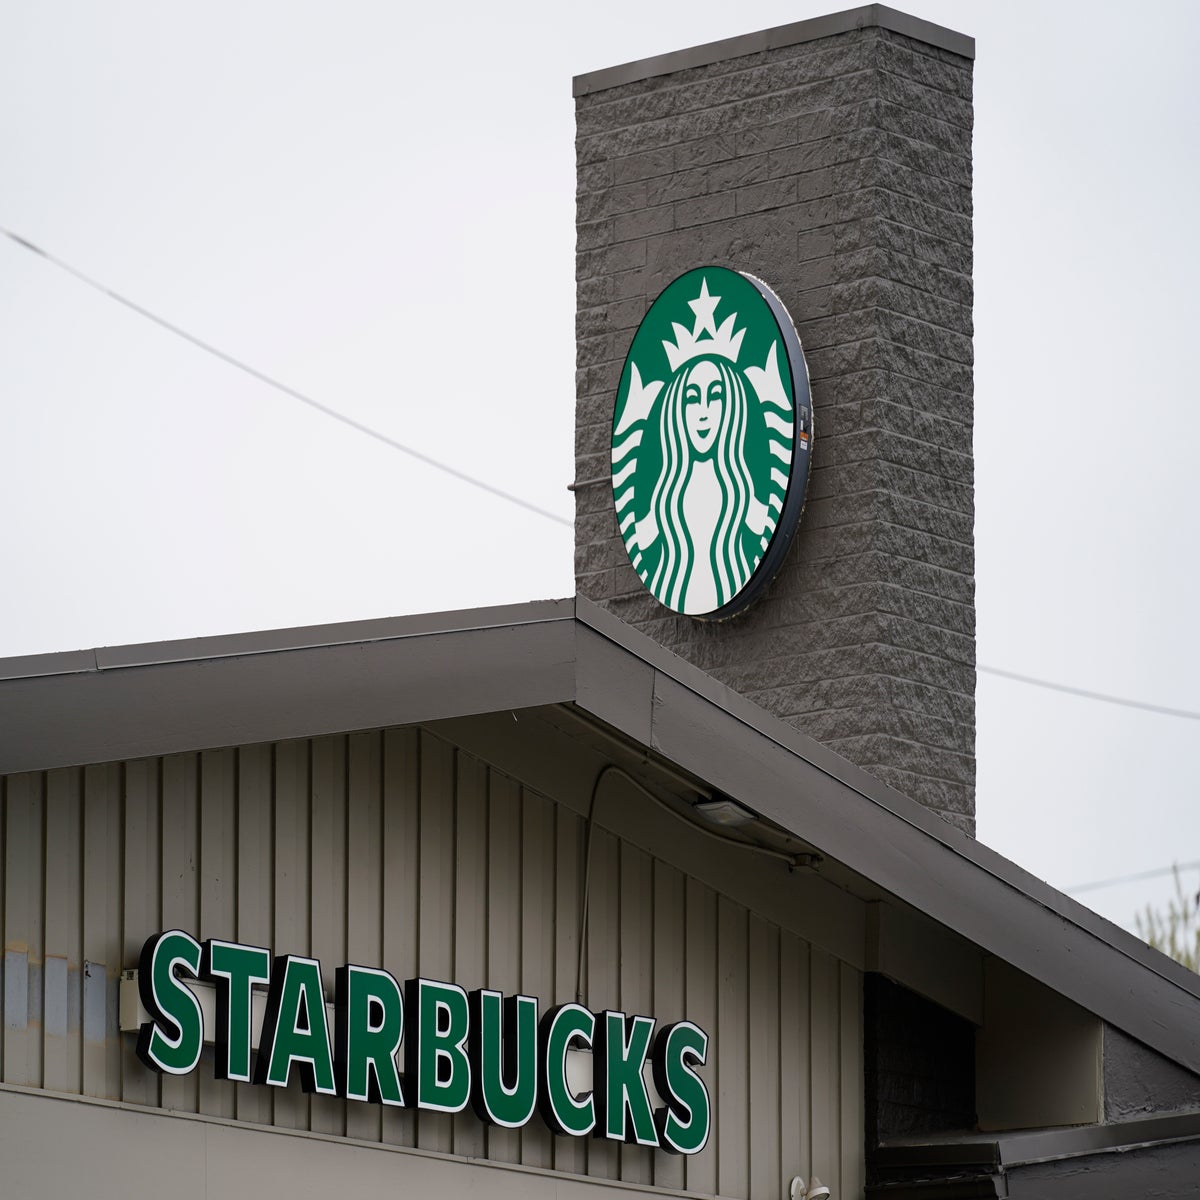 Ex-Starbucks manager claims he was told to punish pro-union staff: 'I  didn't want to do illegal stuff